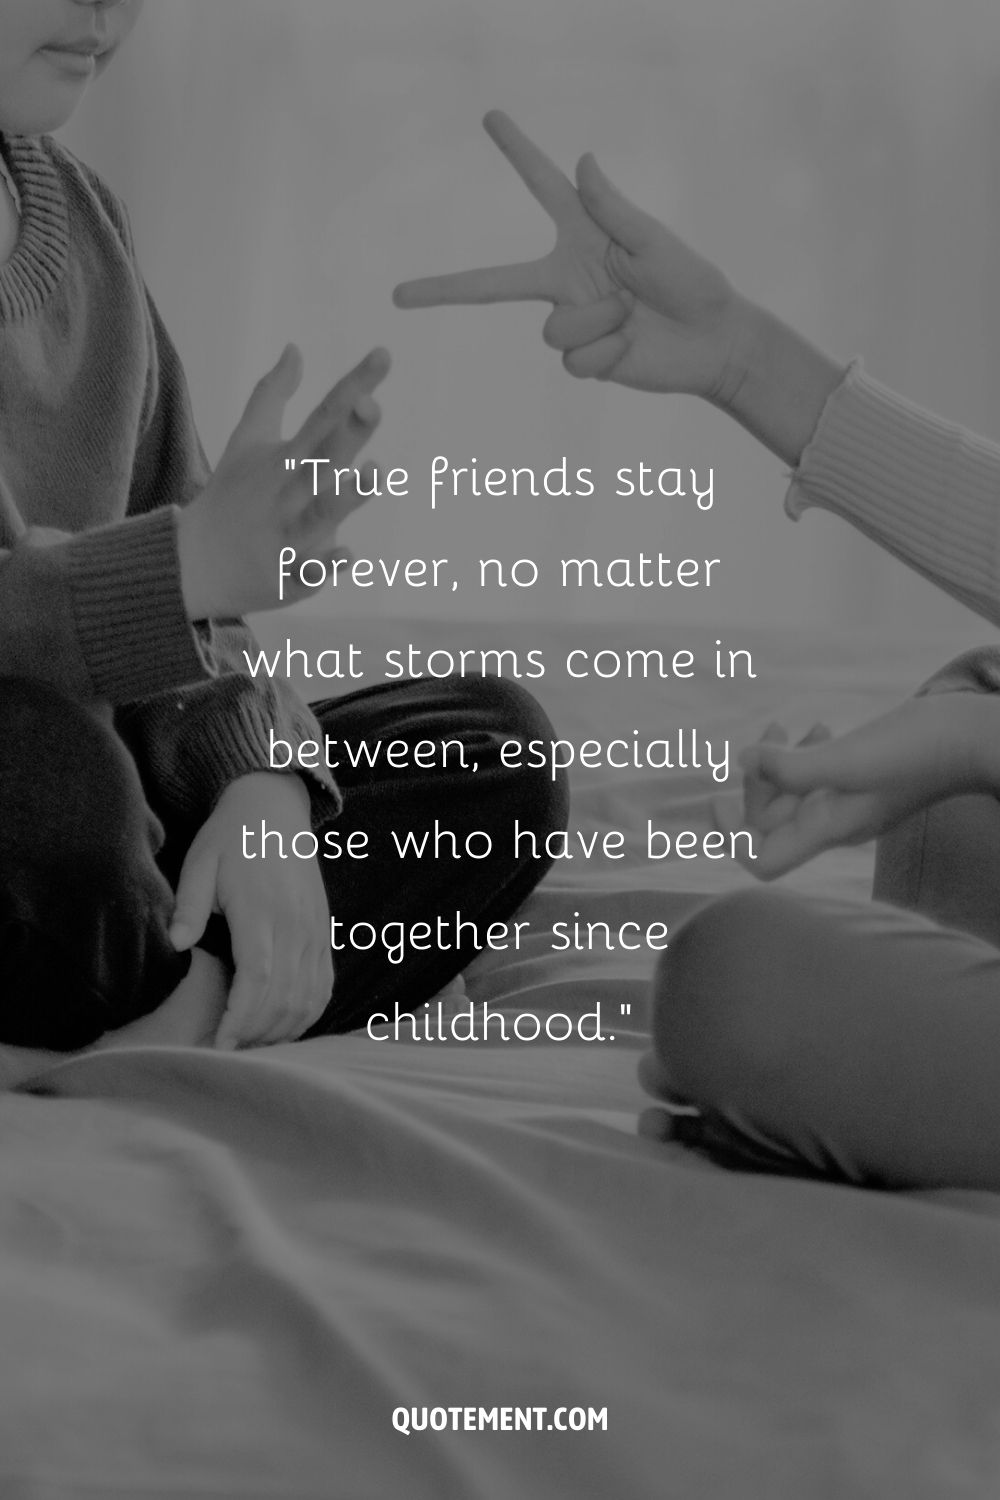 two kids enjoy a hand game on the bed representing friends forever quote
